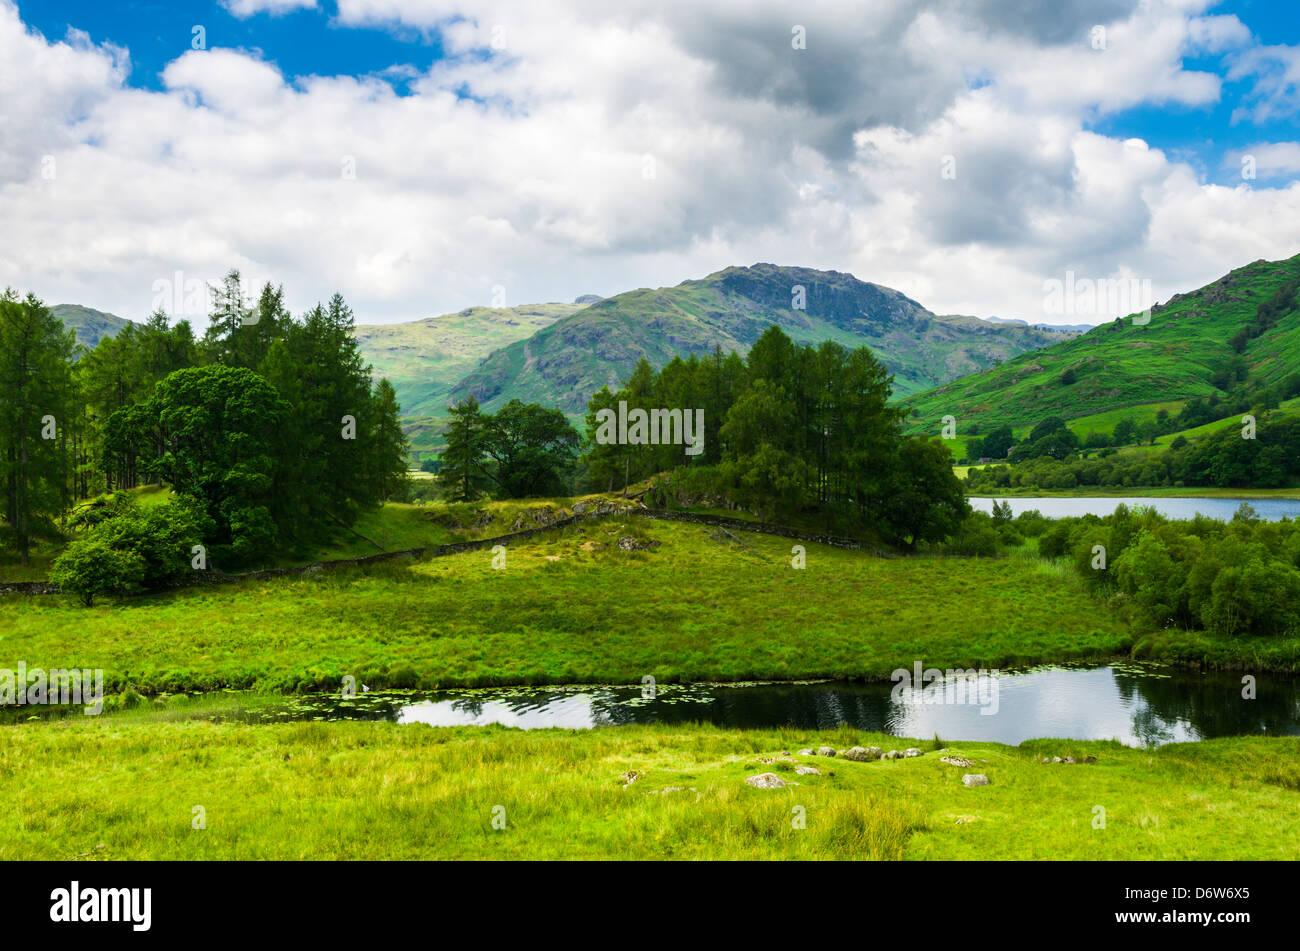 Wetherlam and the River Brathay in the Lake District, Cumbria, England. Stock Photo